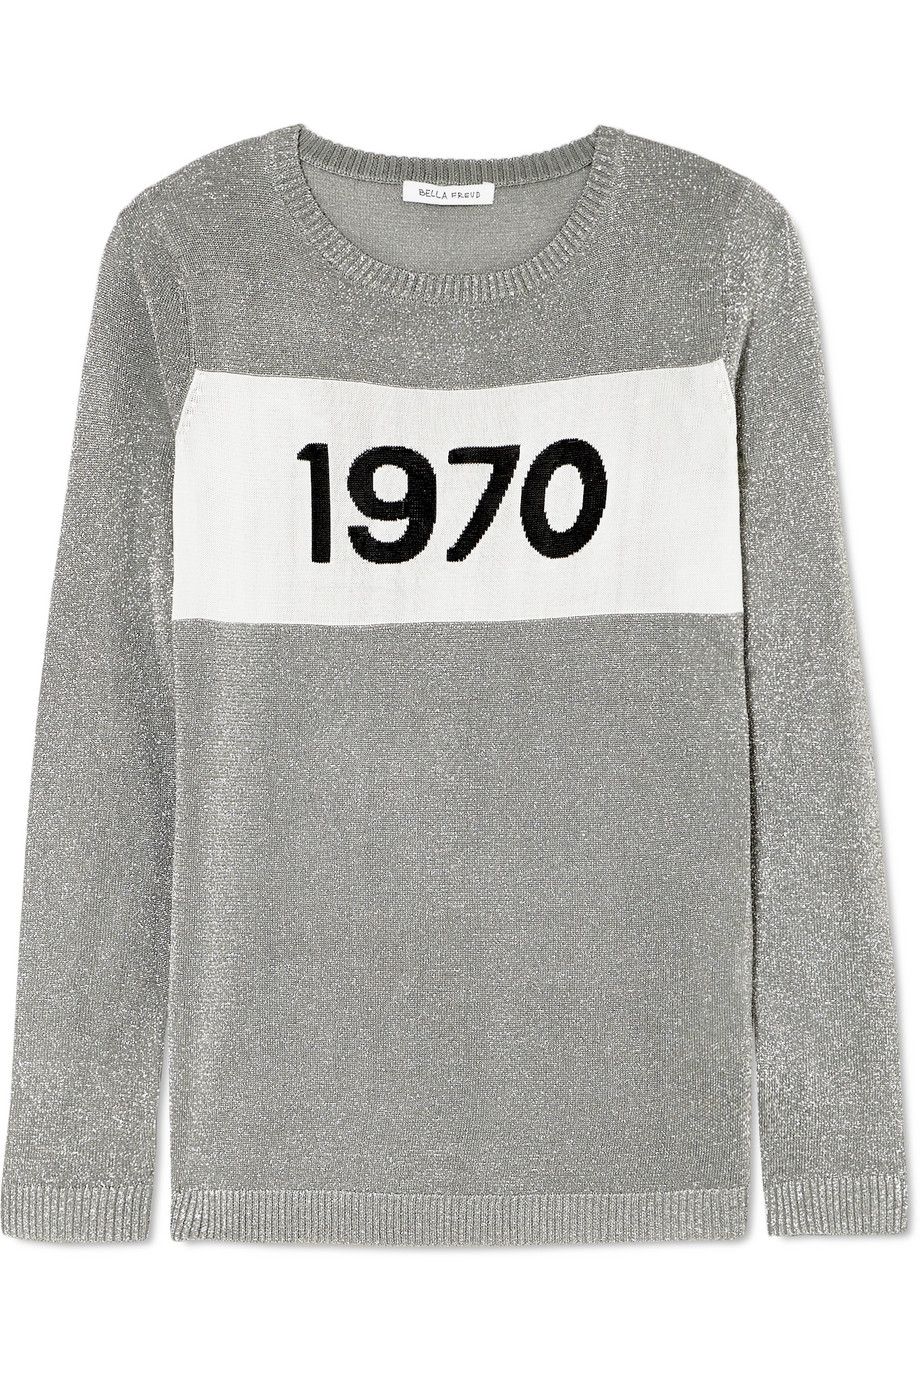 Clothing, Long-sleeved t-shirt, White, Sleeve, T-shirt, Grey, Outerwear, Sweater, Top, Font, 